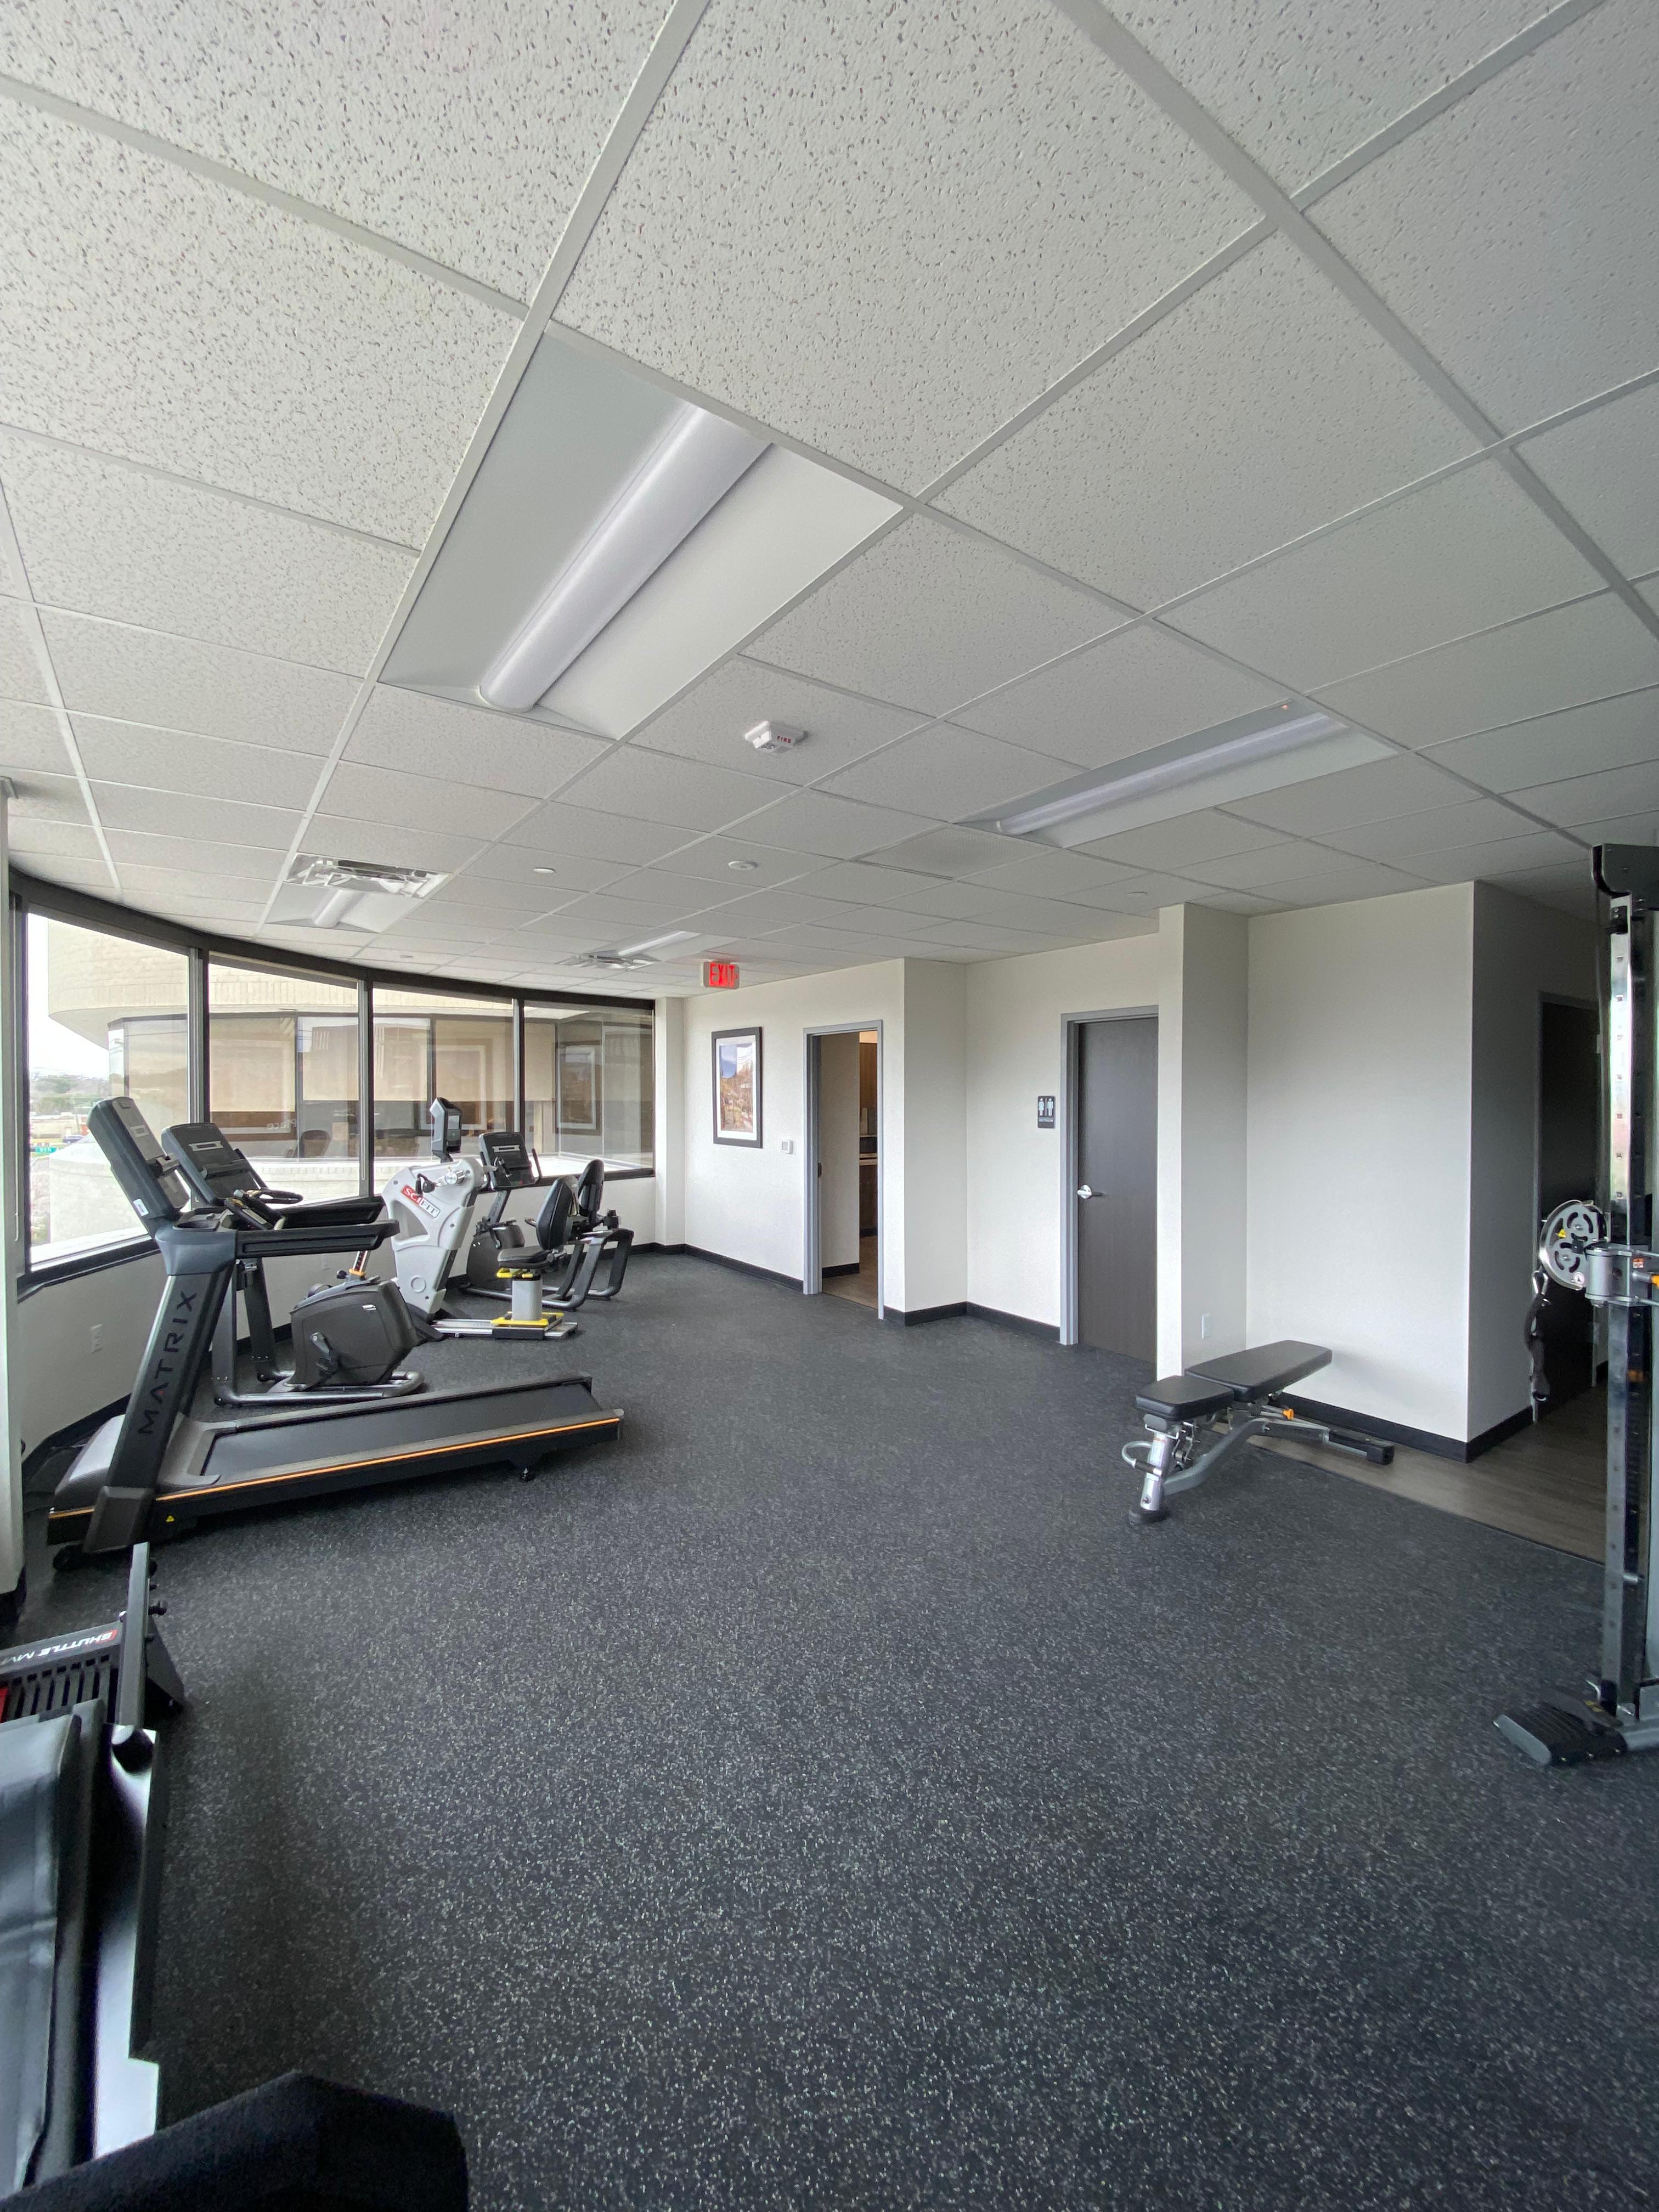 Vista Physical Therapy - Fort Worth, Rosedale 
1650 W. Rosedale St, Suite 305
Fort Worth, TX 76104